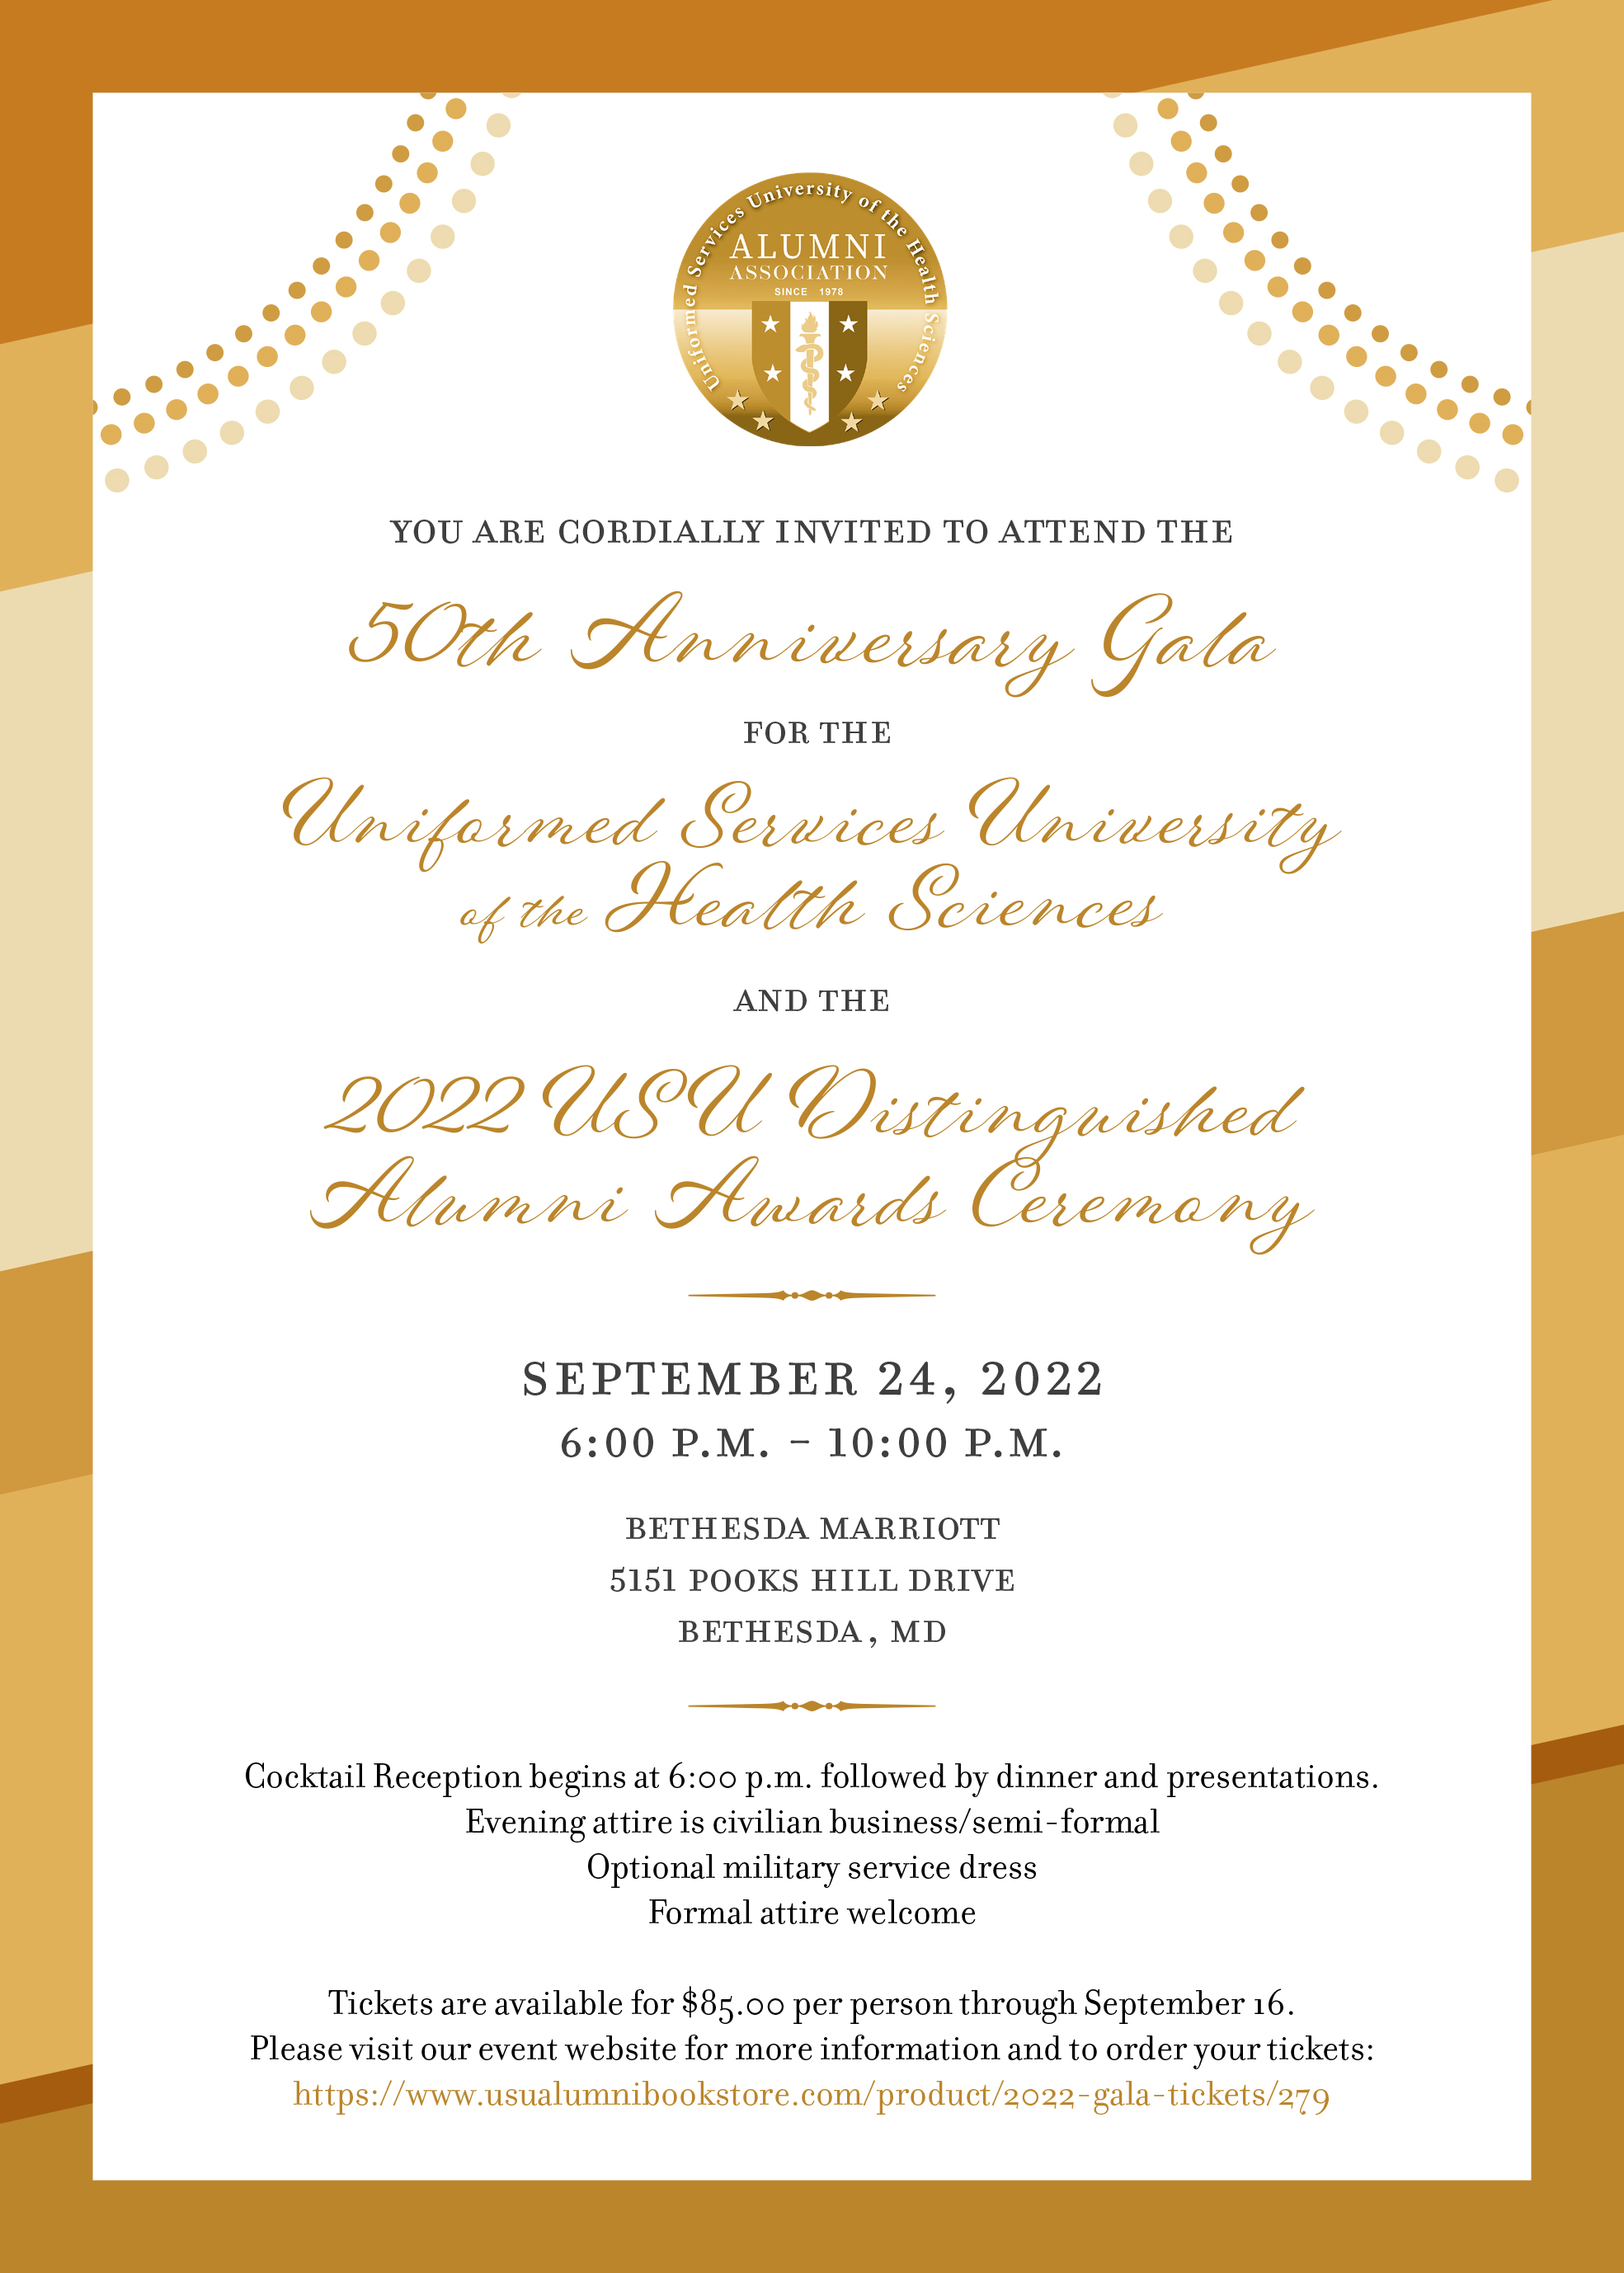 You are cordially invited to attend the 50th Anniversary Gala for the Uniformed Services University of the Health Sciences and the 2022 USU Distinguished Alumni Awards Ceremony, September 24, 2022 6:00PM - 10:00PM. Bethesda Marriott 5151 Pooks Hill Drive Bethesda, MD. Cocktail Reception begins at 6:00 pm followed by dinner and presentations. Evening attire is civilian business/semi-formal. Optional military service dress. Formal attire welcome. Tickets are available for $85.00 per person through September16